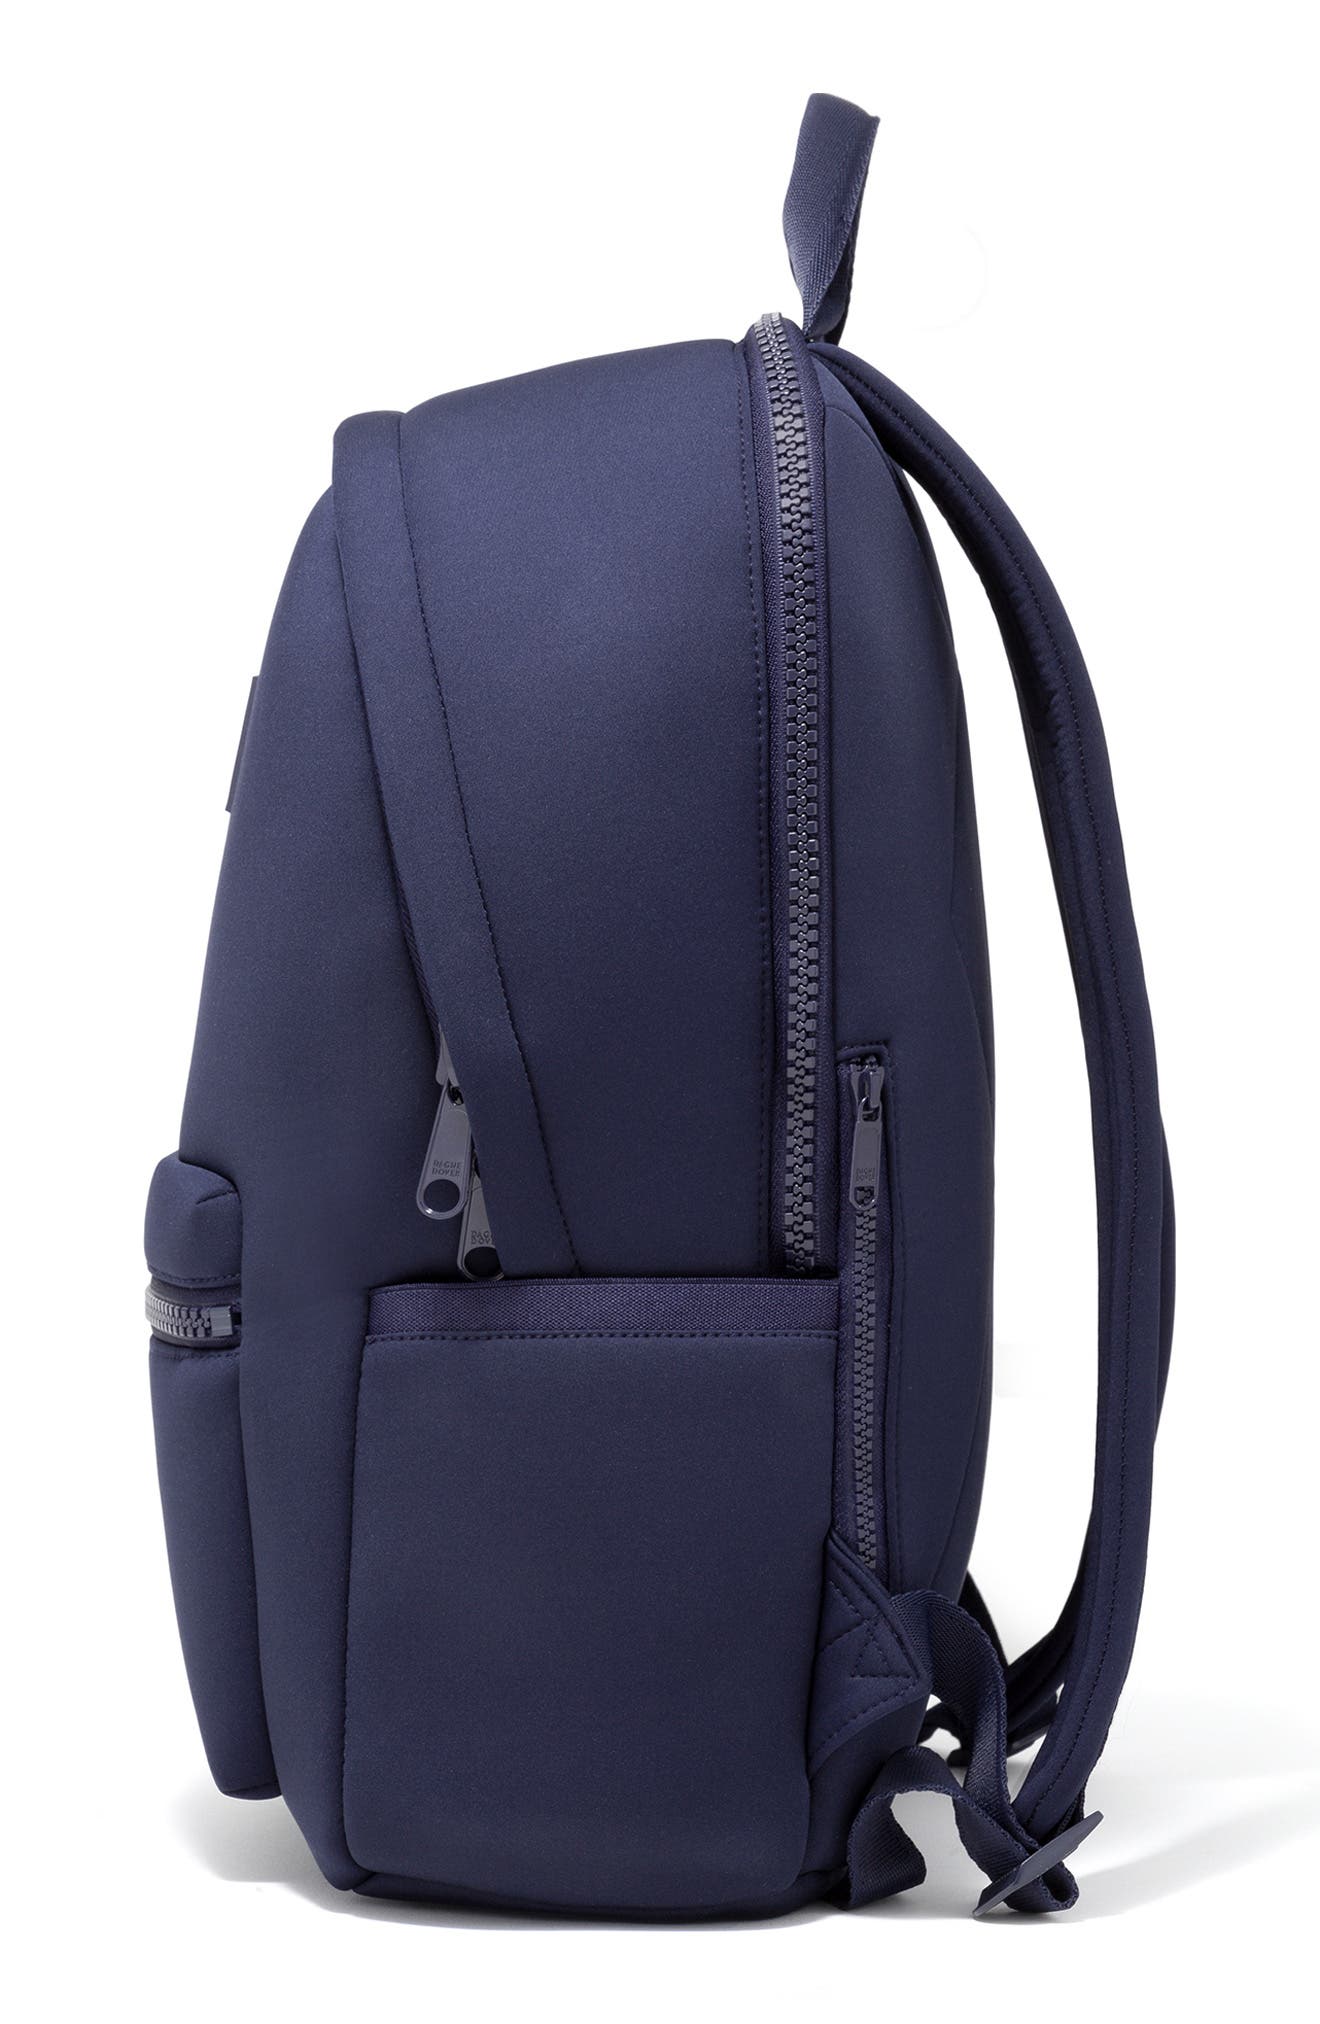 Dagne Dover - The Medium Landon Carryall fits most 13” laptops, so you can  carry your work and gym essentials, all in one bag.